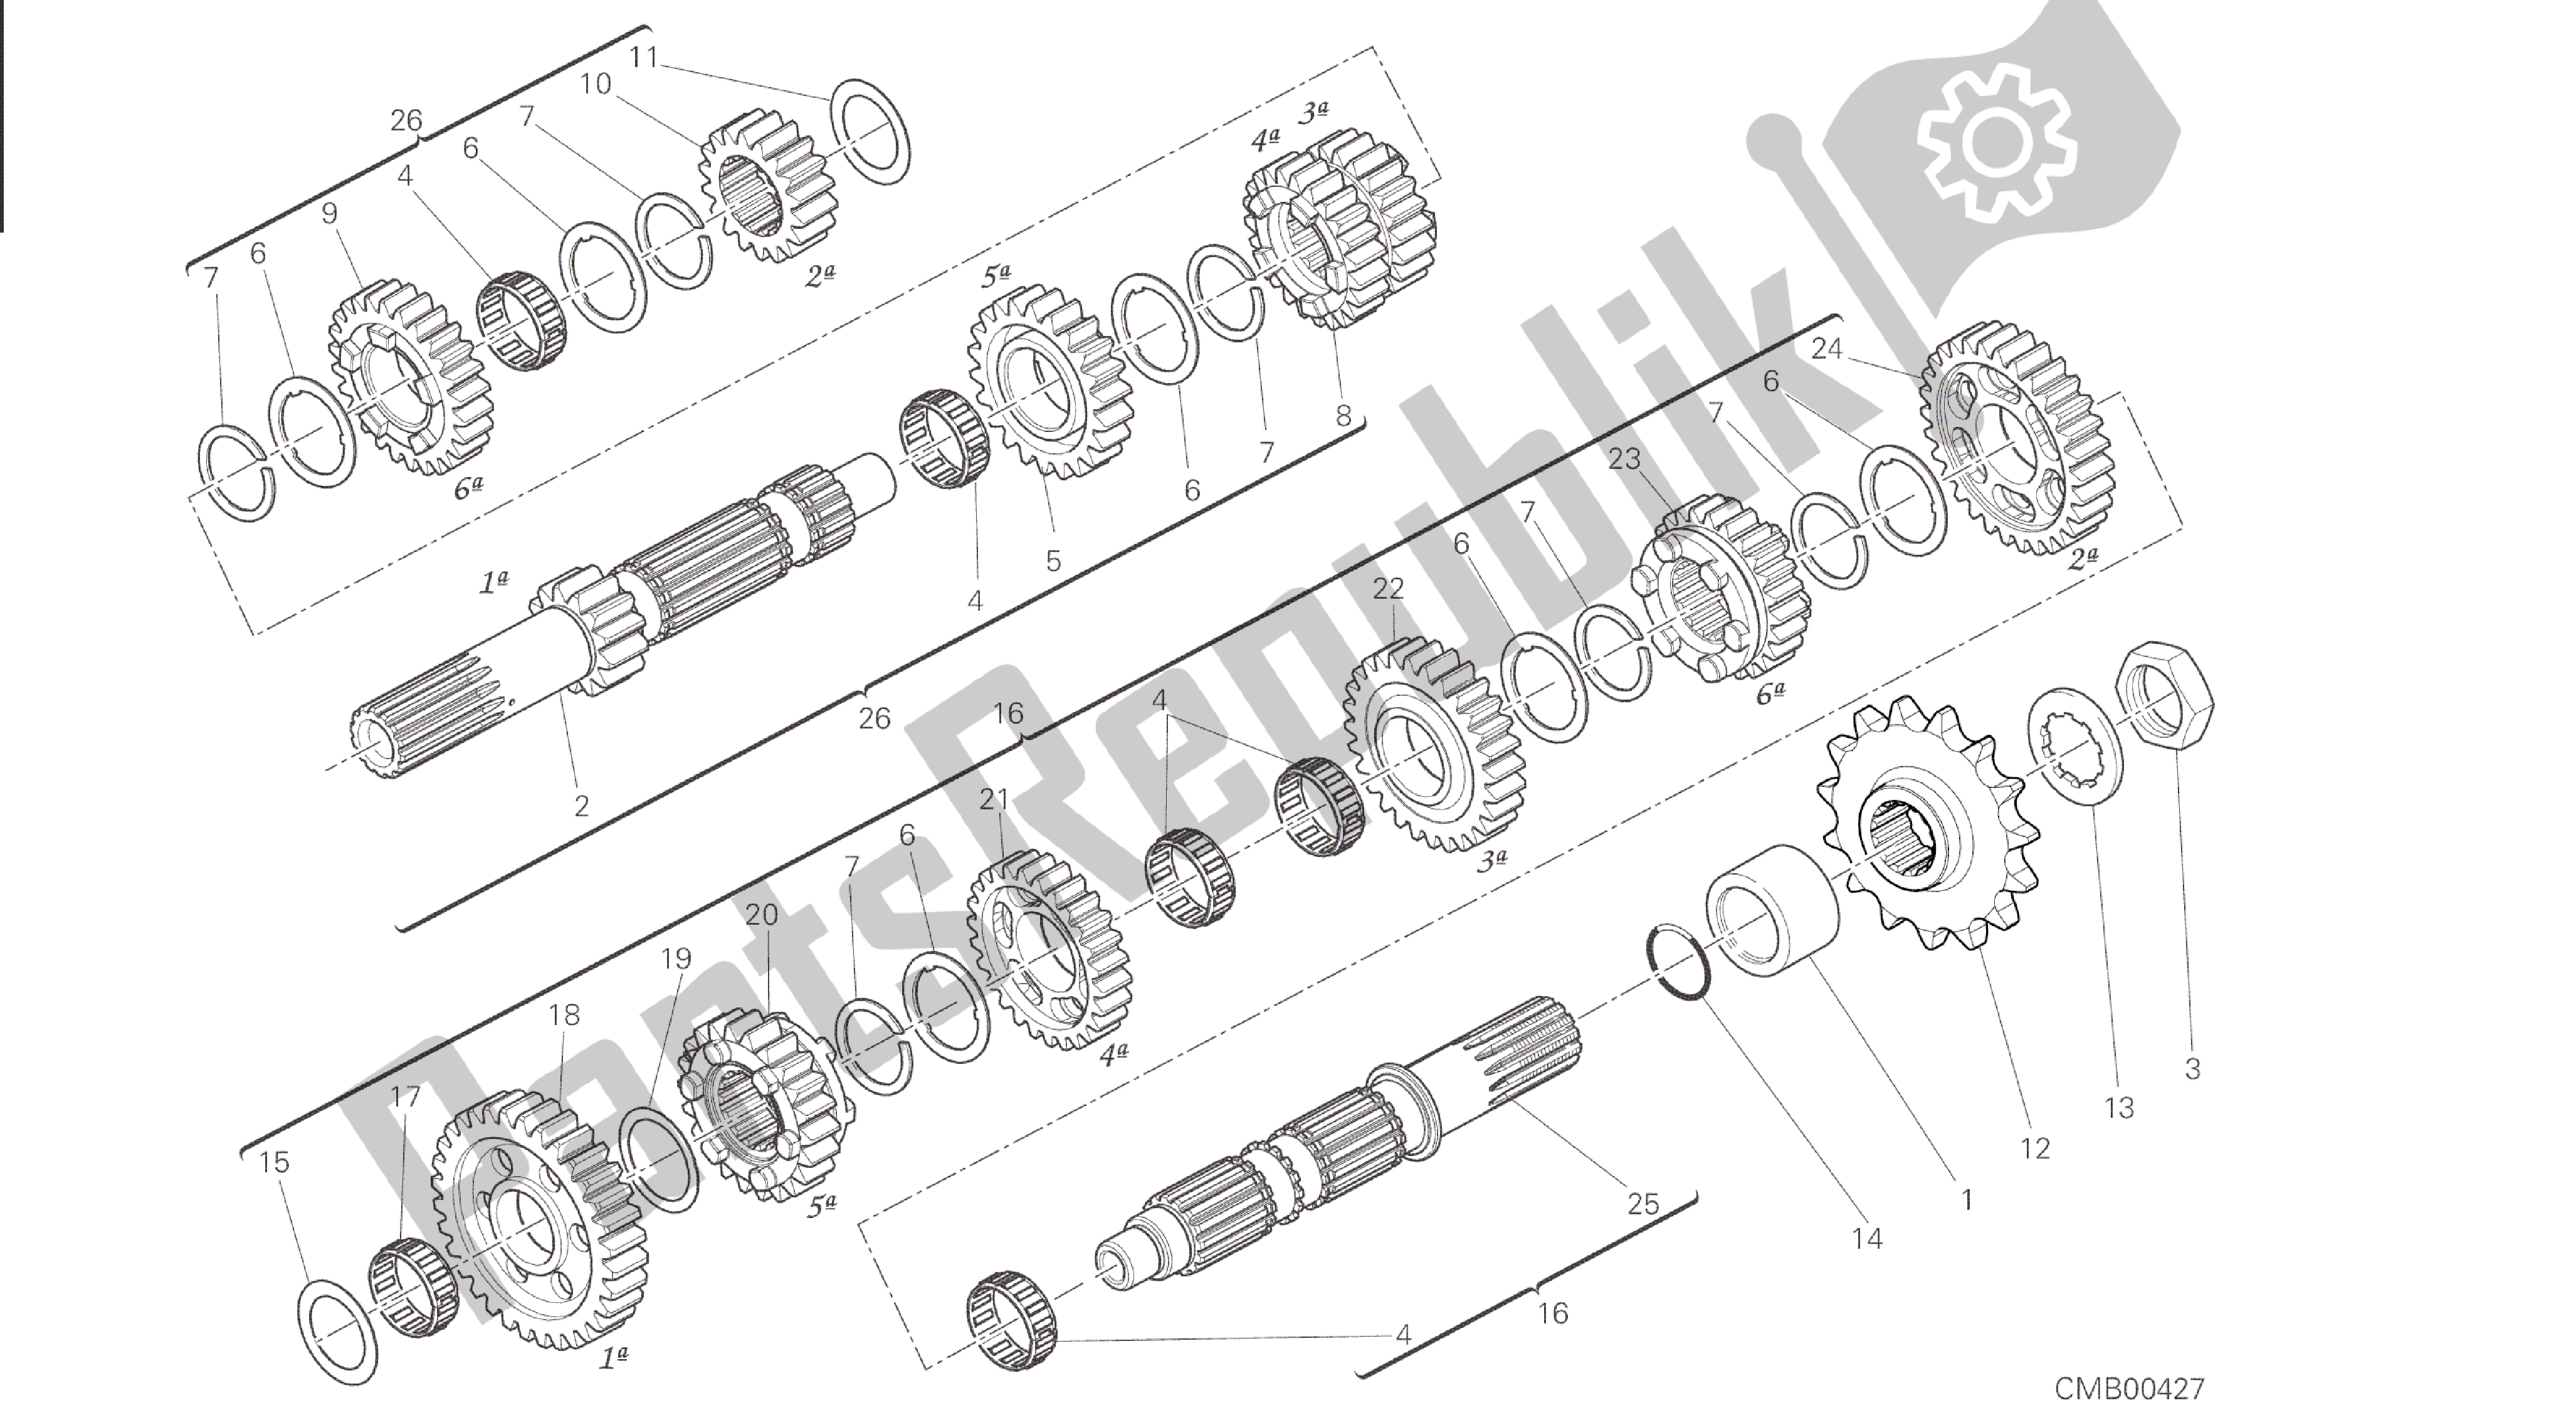 All parts for the Drawing 003 - Gear Box [mod:m 821]group Engine of the Ducati Monster 821 2015